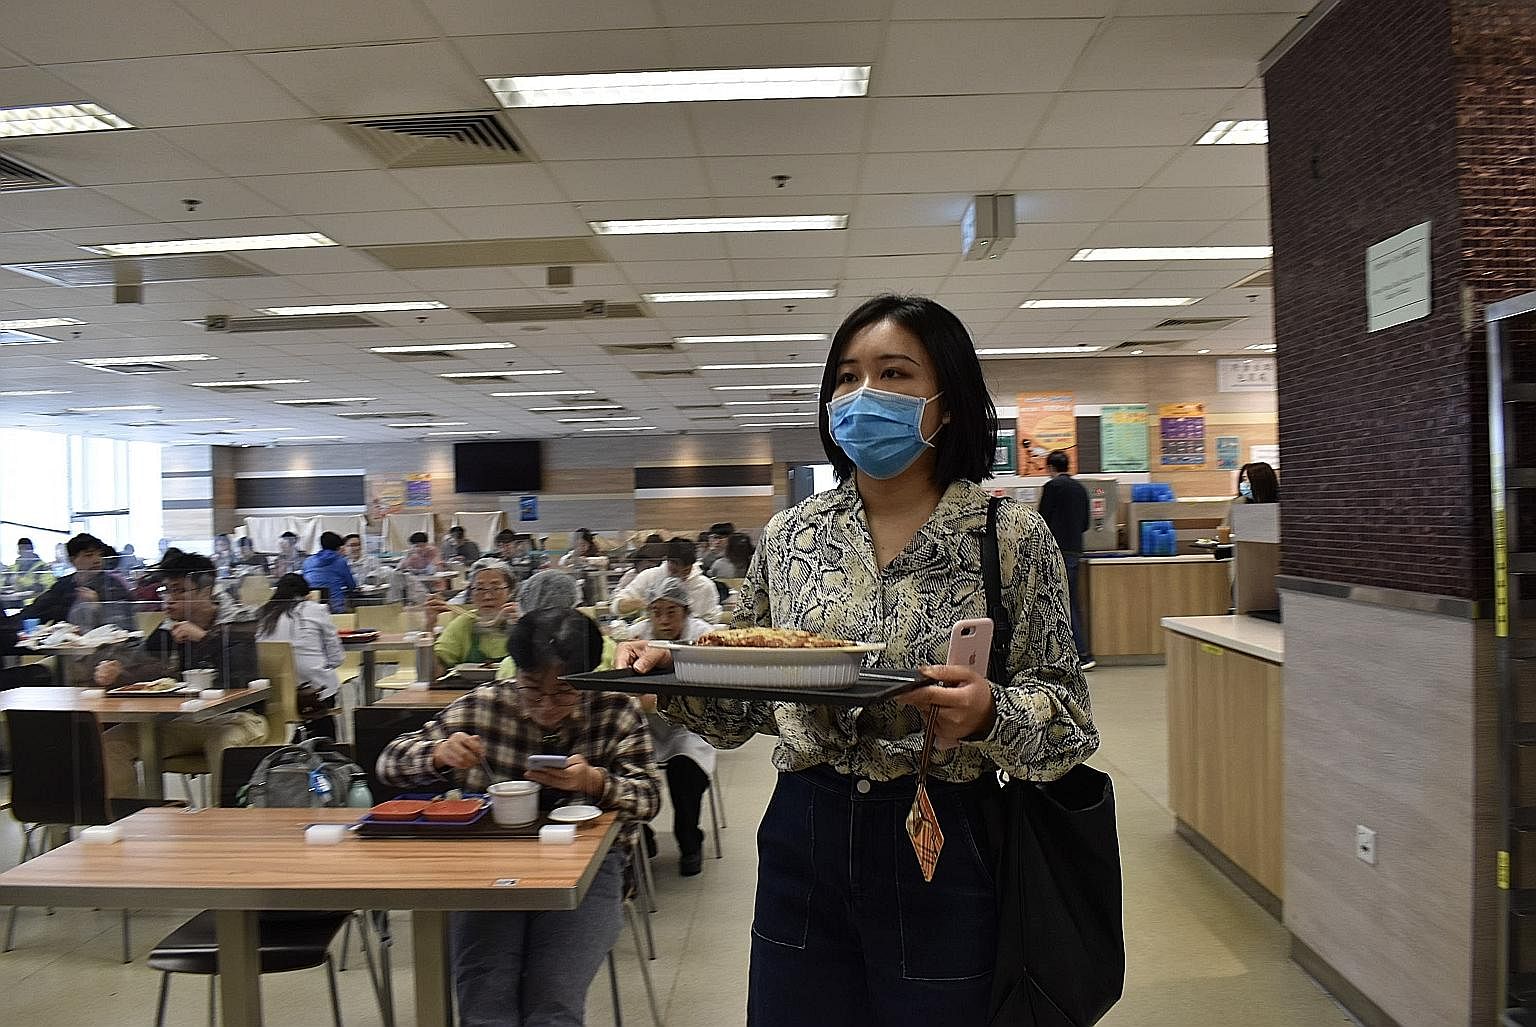 SHANDONG NATIVE, NEW IN HONG KONG Ms Yue Meng Ying inside a cafeteria at Hong Kong Baptist University, where she is a student. She said her experiences with discrimination are rare and usually linked to language as she cannot speak Cantonese. BORN IN